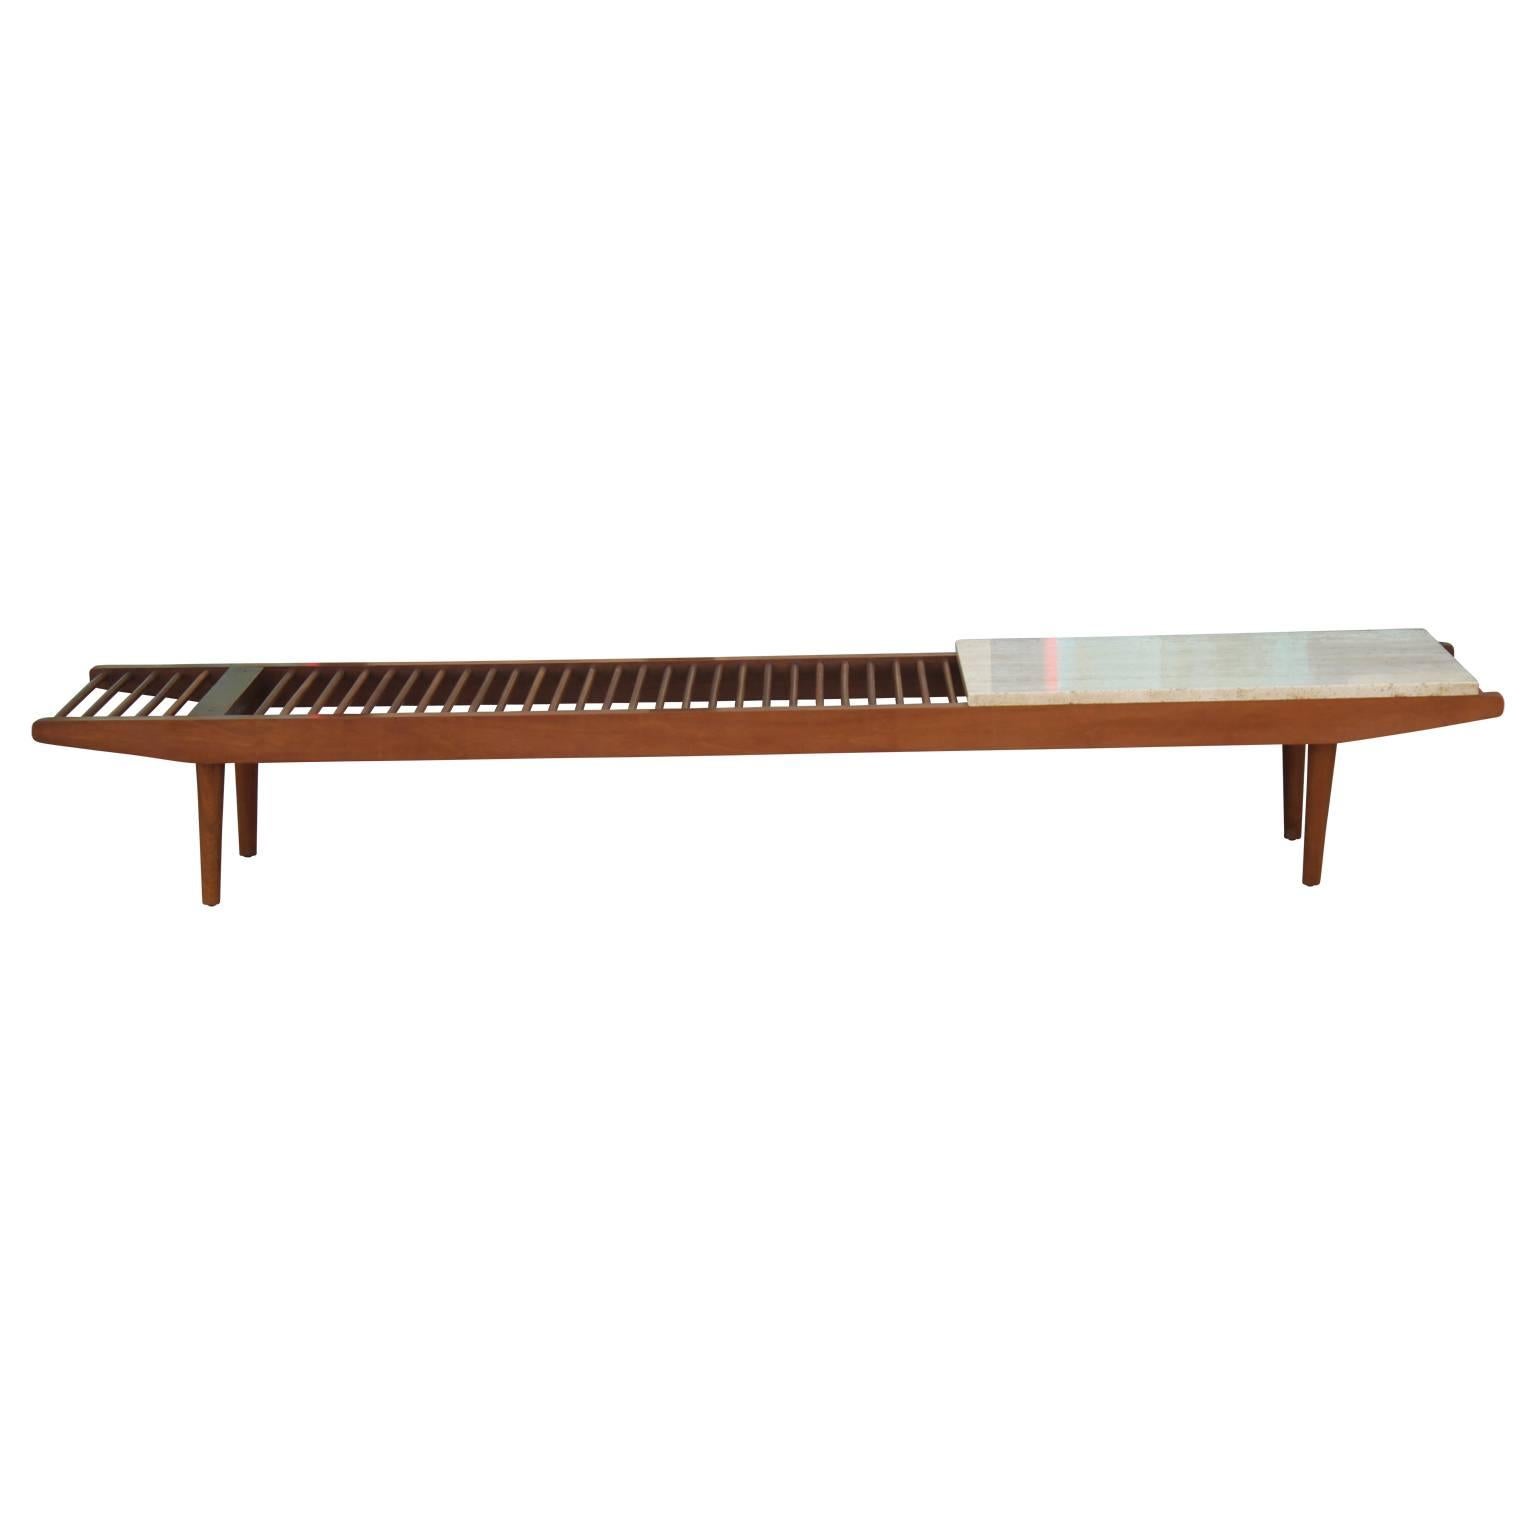 Modern and unique dowel bench with a travertine top designed by Milo Baughman for Glenn of California.